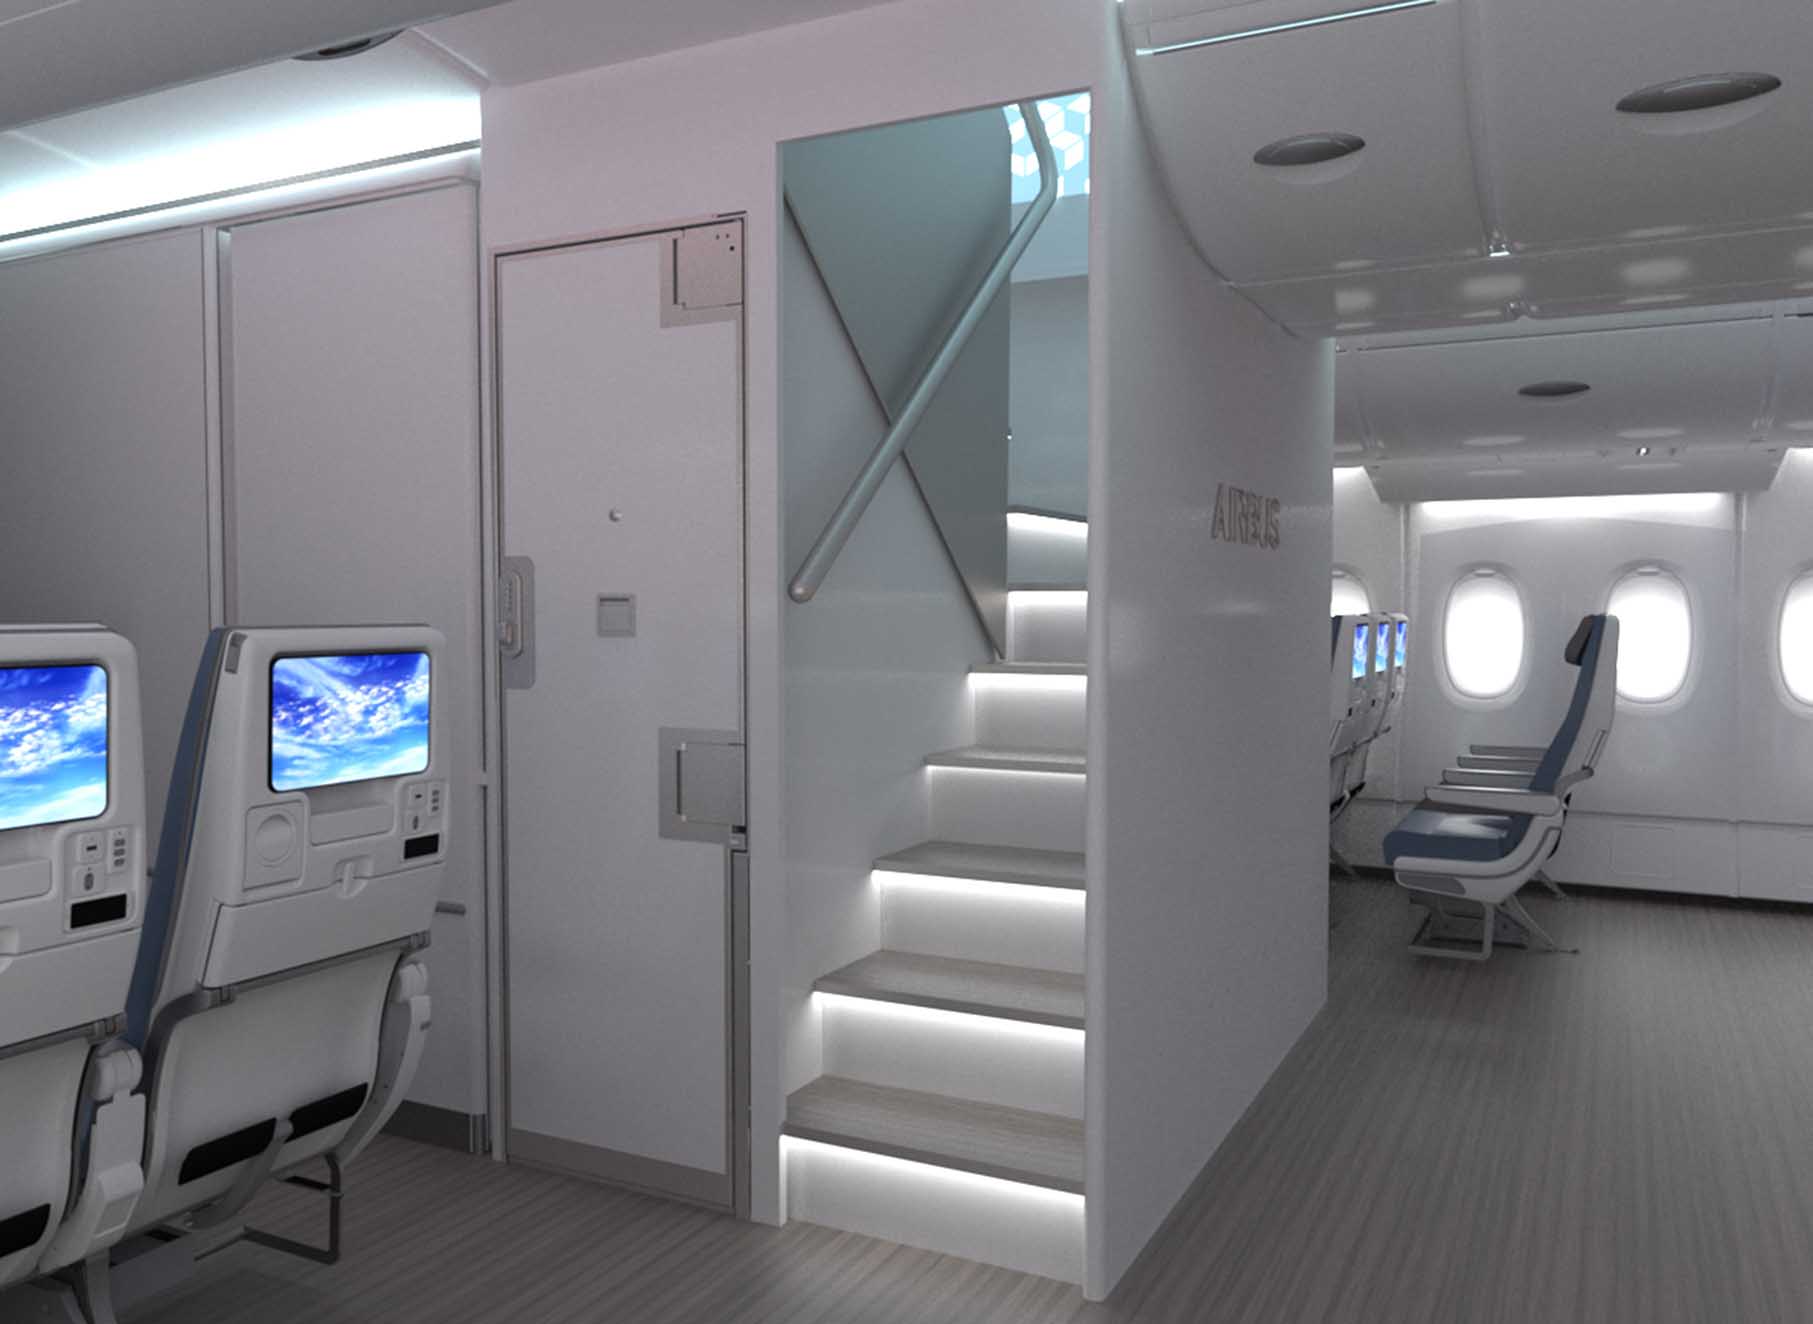 Airbus develops package of new A380 Cabin Enablers, including “New Forward Stairs” option, for A380 customers